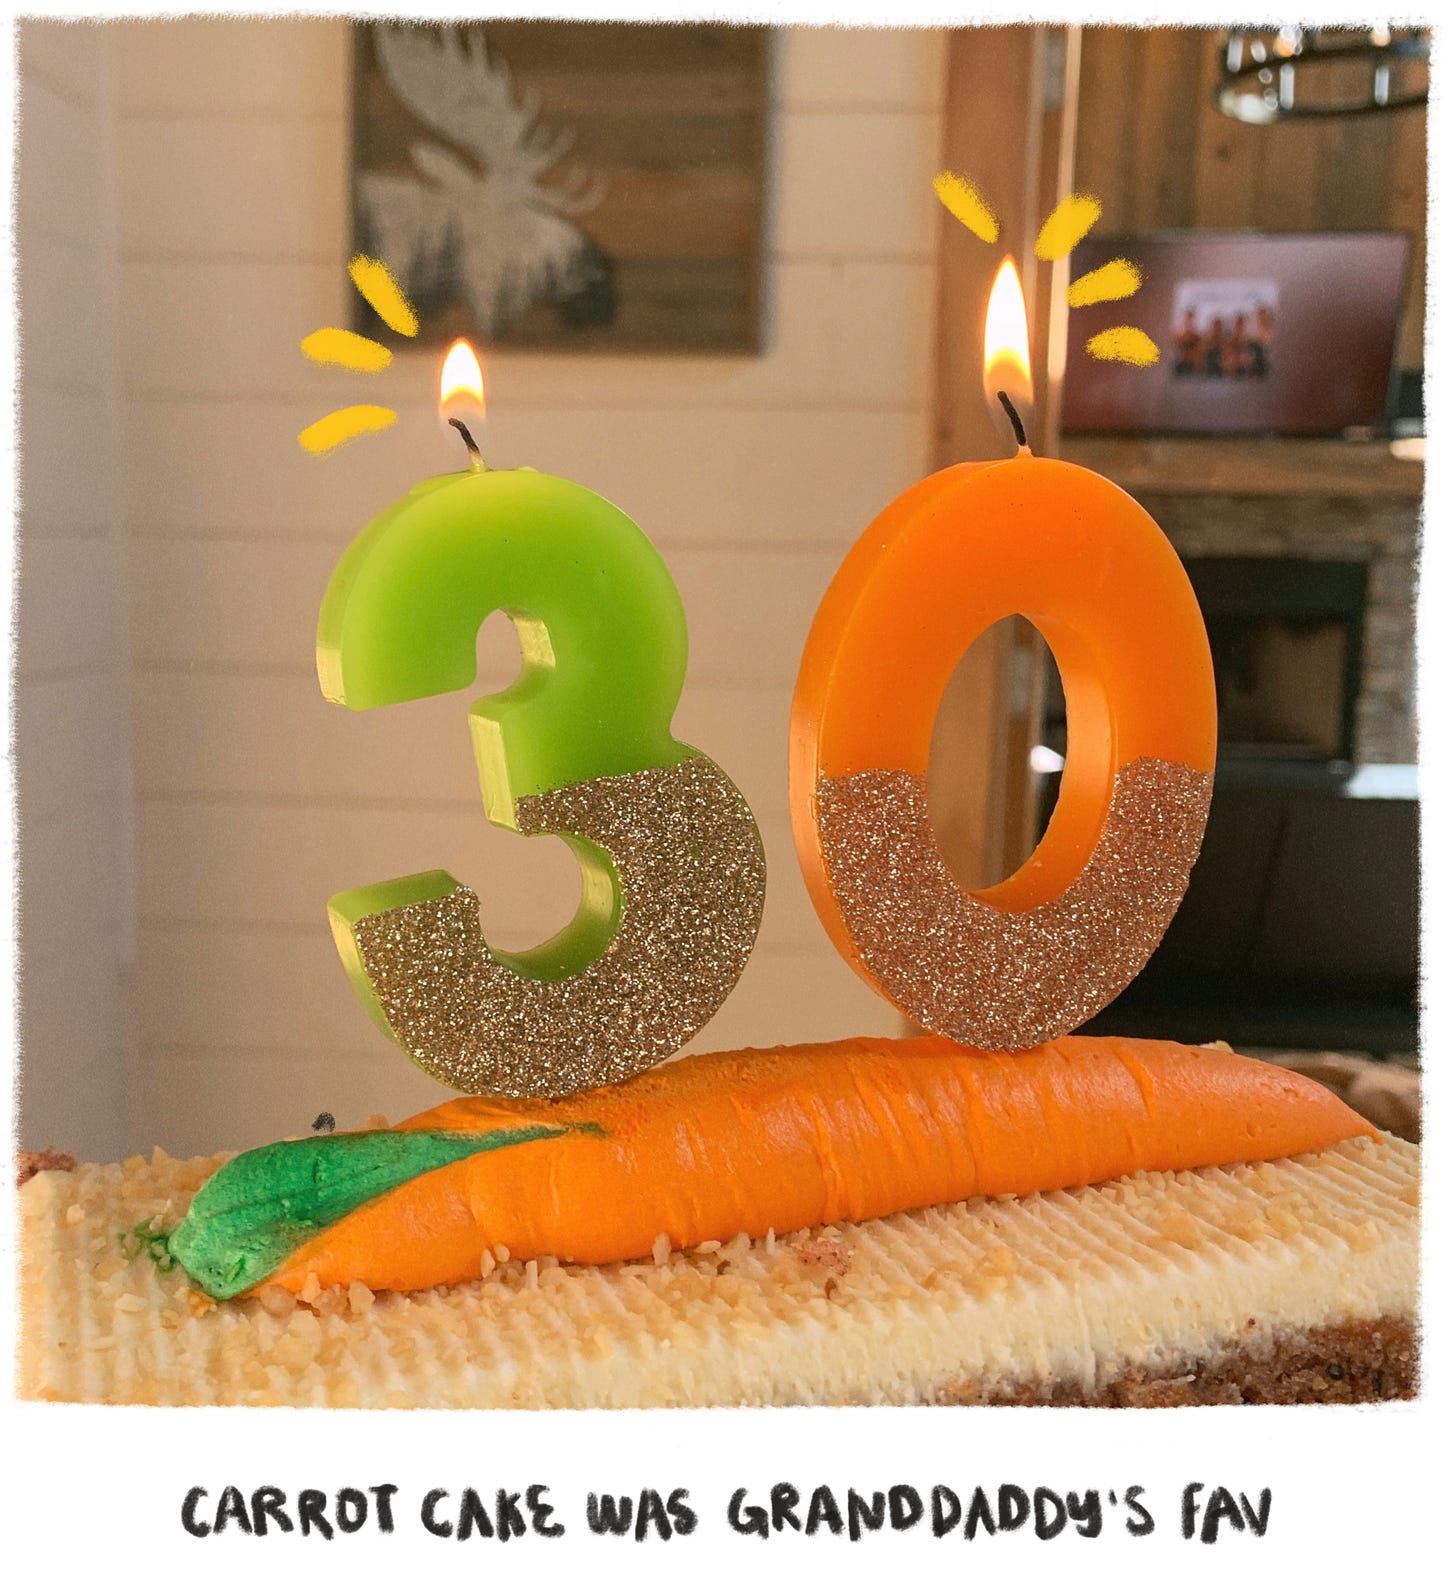 A carrot cake with two candles ("3" and "0") on top. In the background is the living room of a mountain cabin.